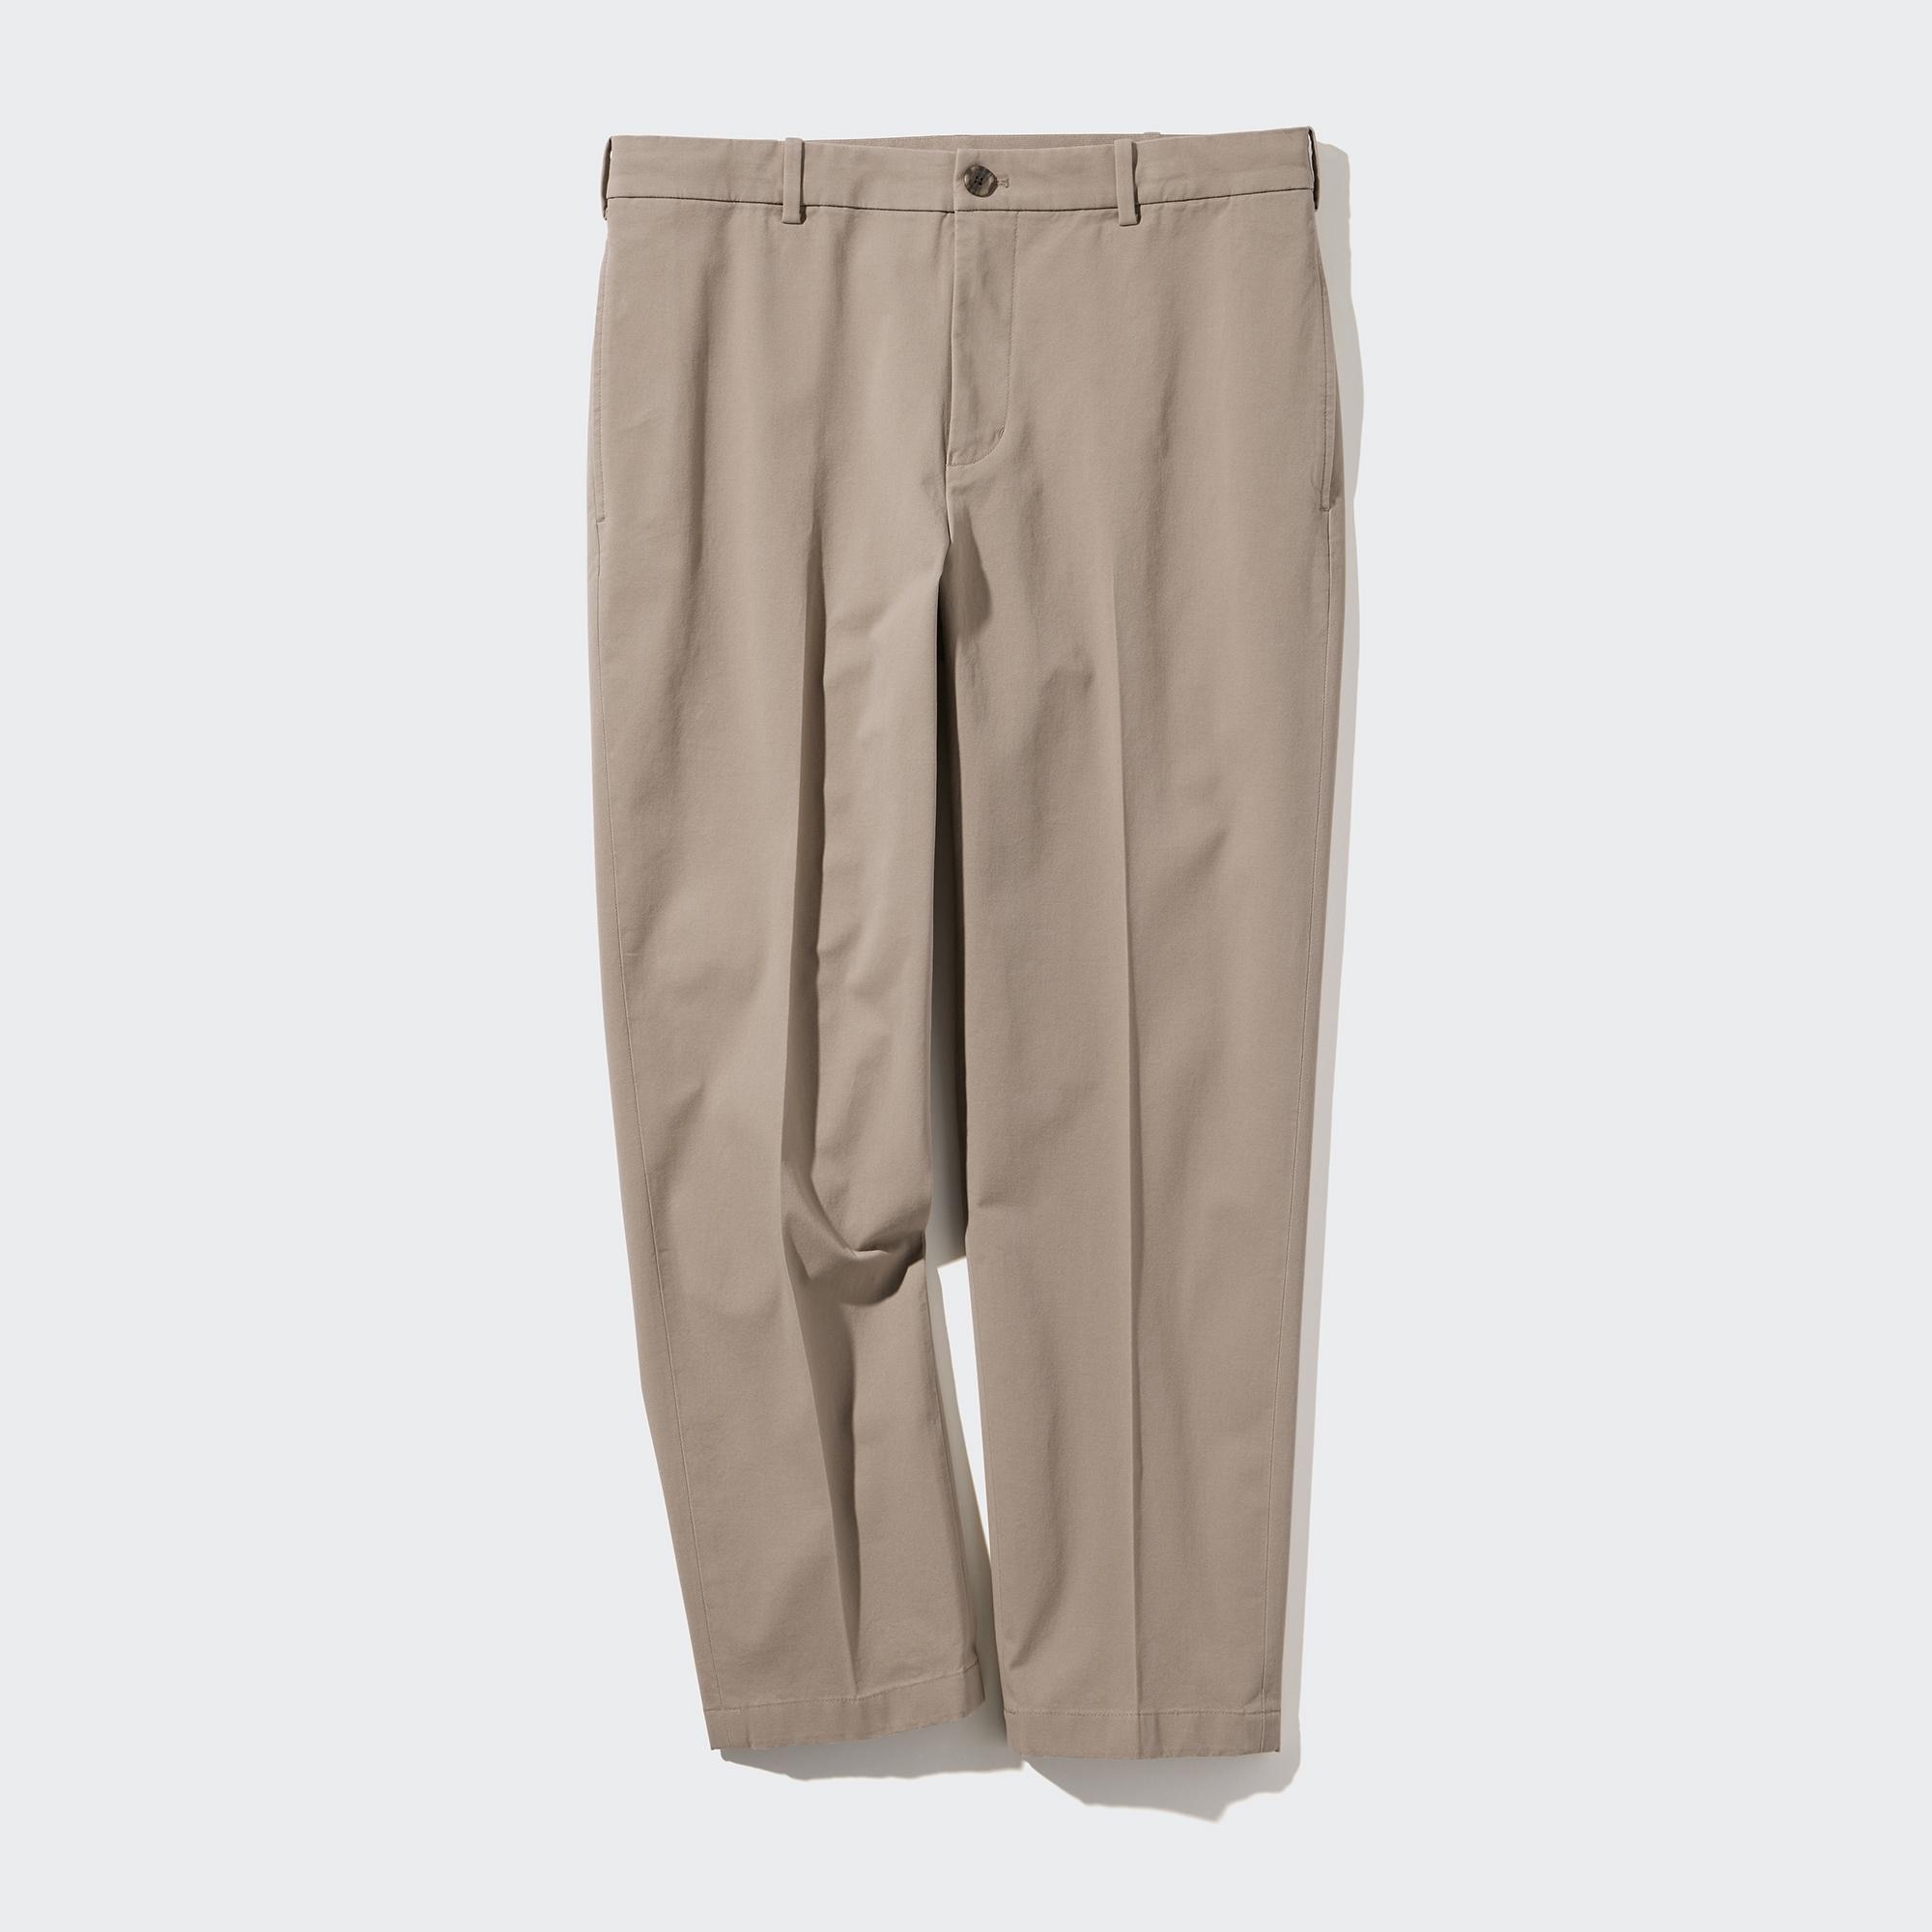 Smart Ankle Pants (2WAY Stretch), In the new normal where business is as  UNusual, the innovative 2WAY Stretch Smart Pants helps you move from  Working Smart to Living Smart. *The EZY